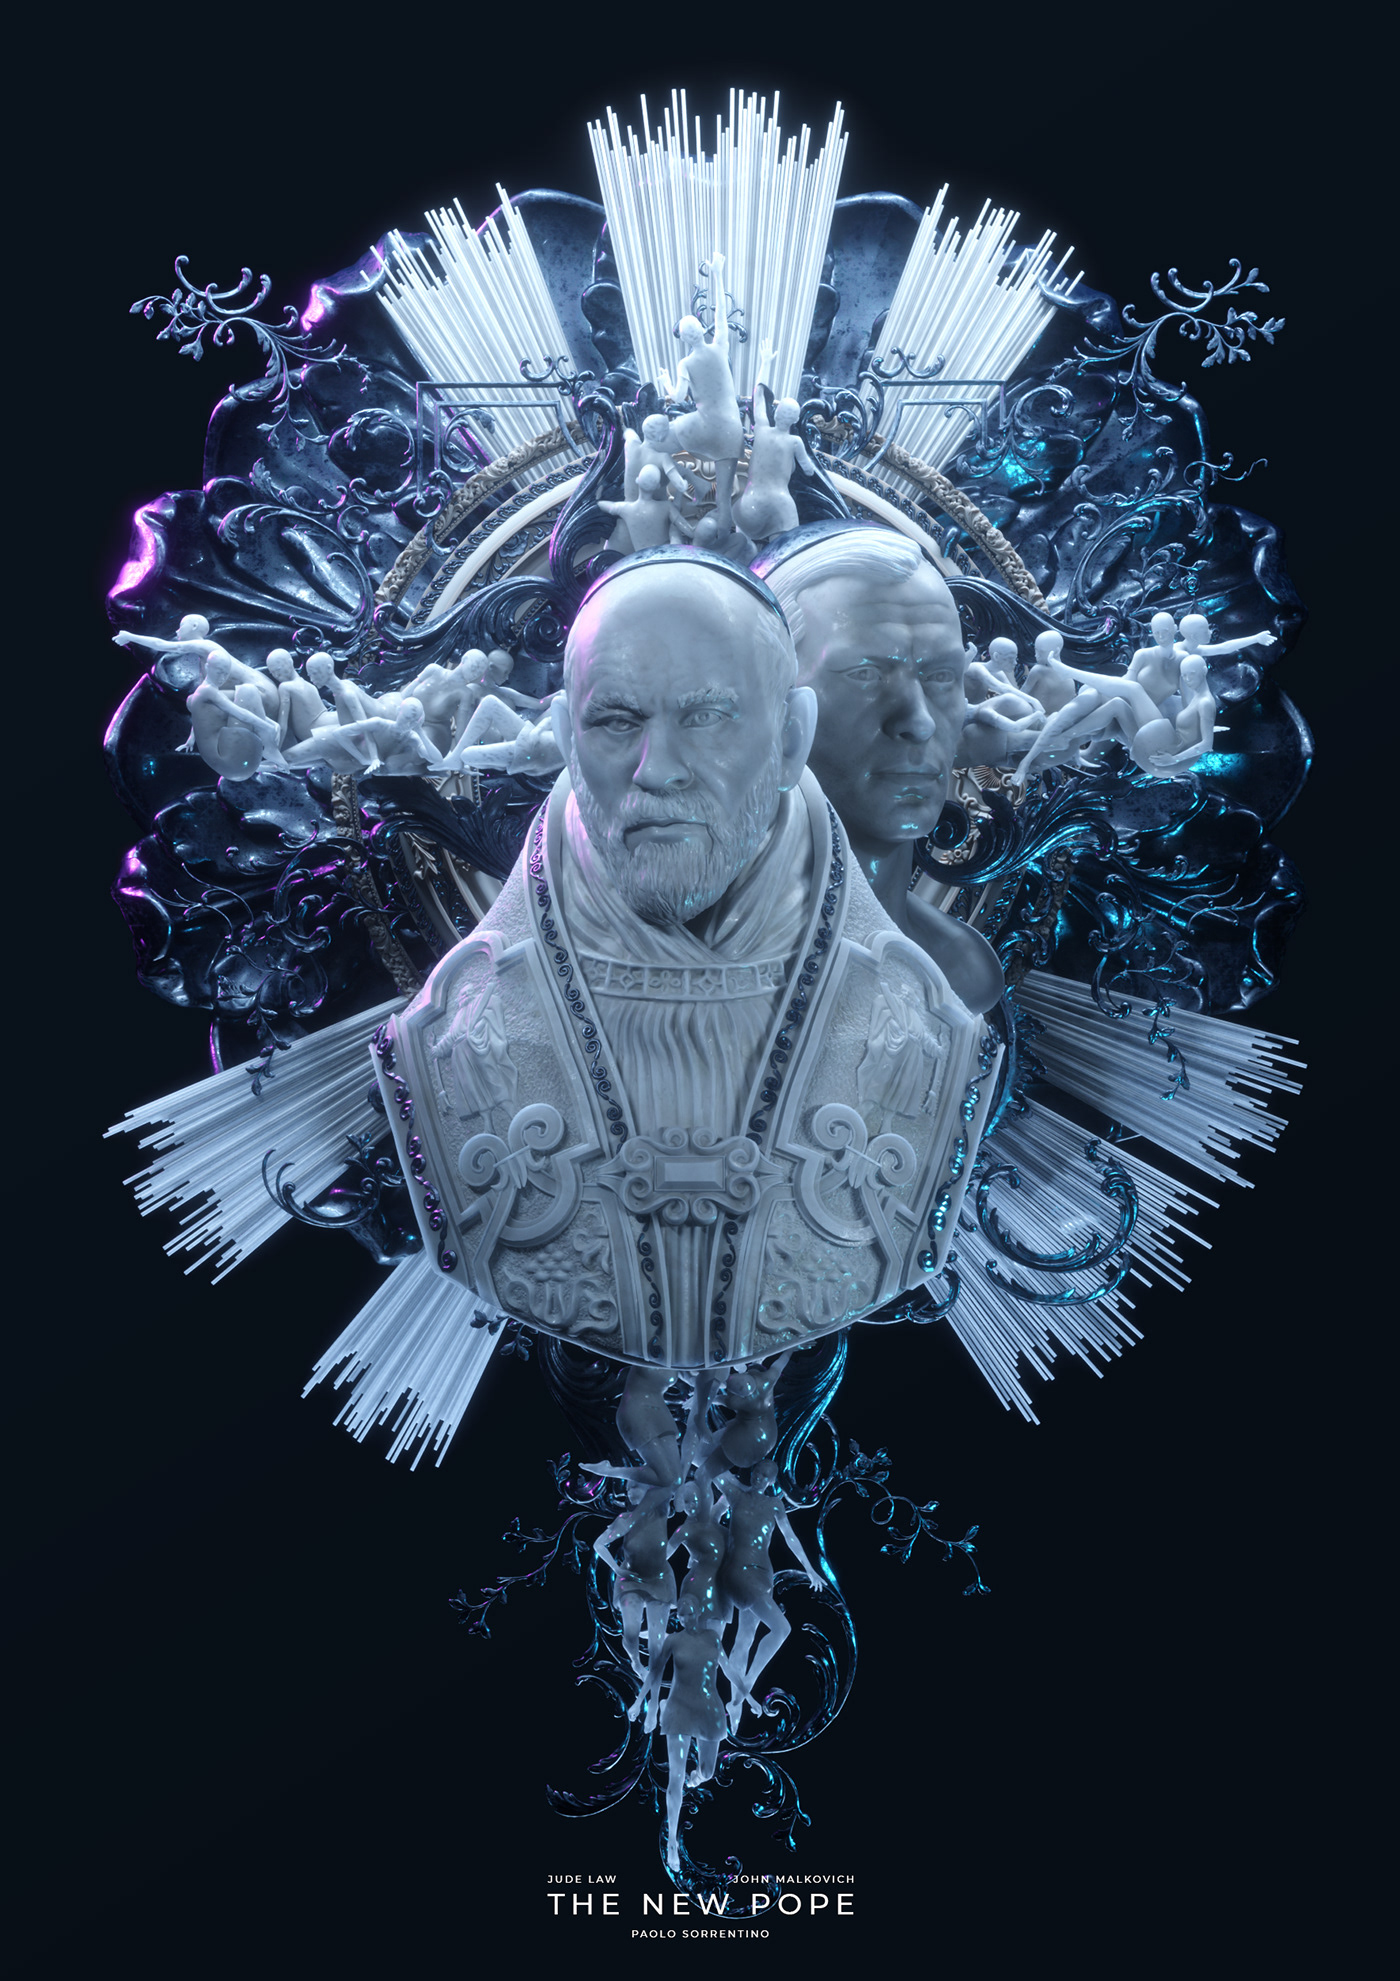 The new Pope jude law octane cinema 4d Zbrush Sculpt hbo SKY